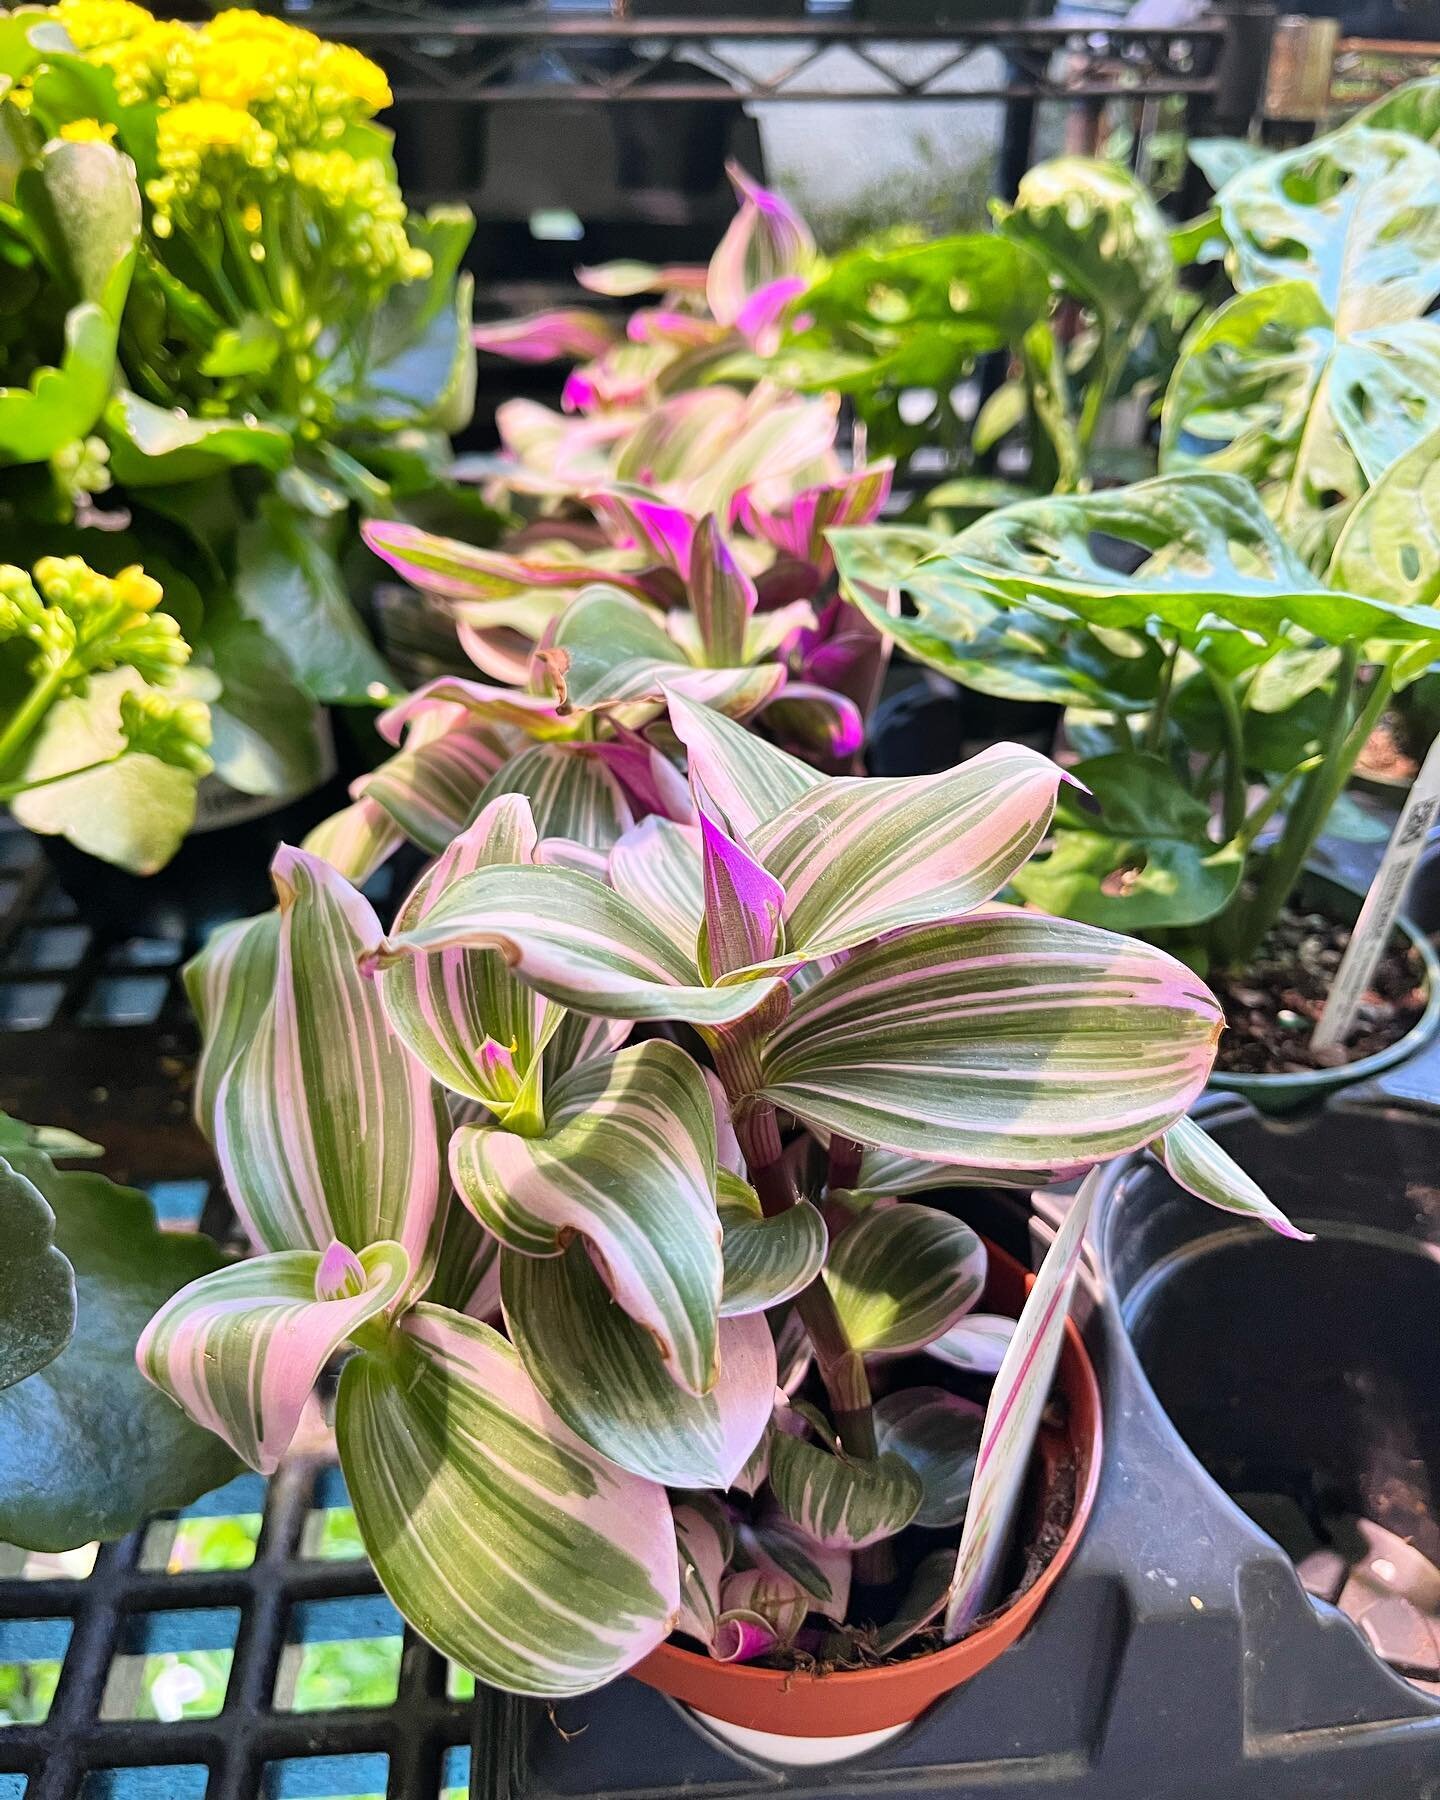 Mother&rsquo;s Day is a week from today&hellip;Does your mom prefer a potted plant over cut flowers? Good thing we have a great selection of both. Come by and we can help you choose. 

#mossyfern #allthingsplants